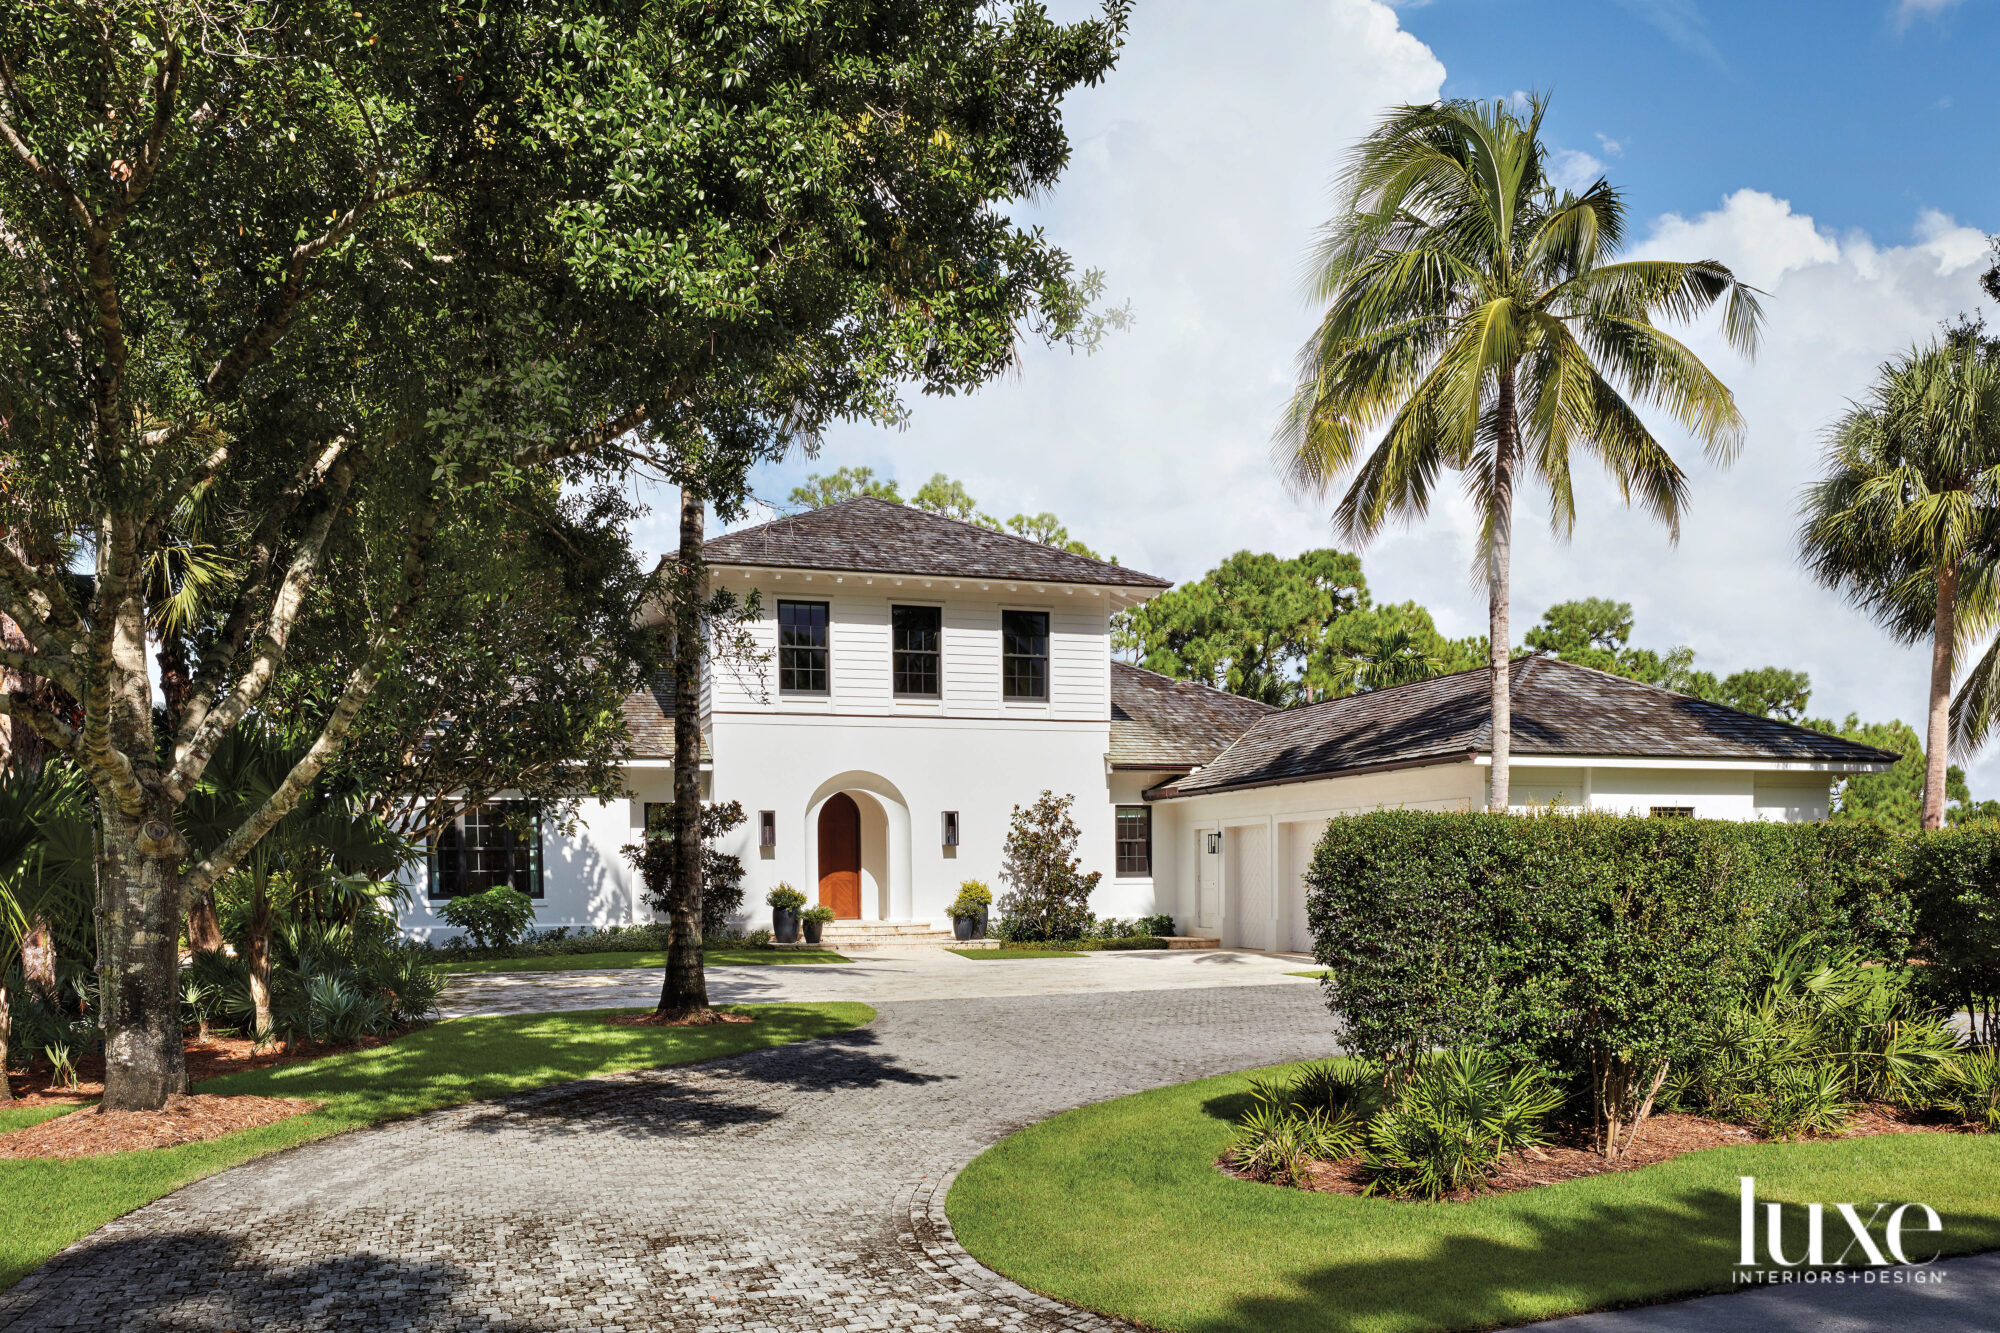 white two-story house with cedar-shingle roof and lush palm tree landscaping